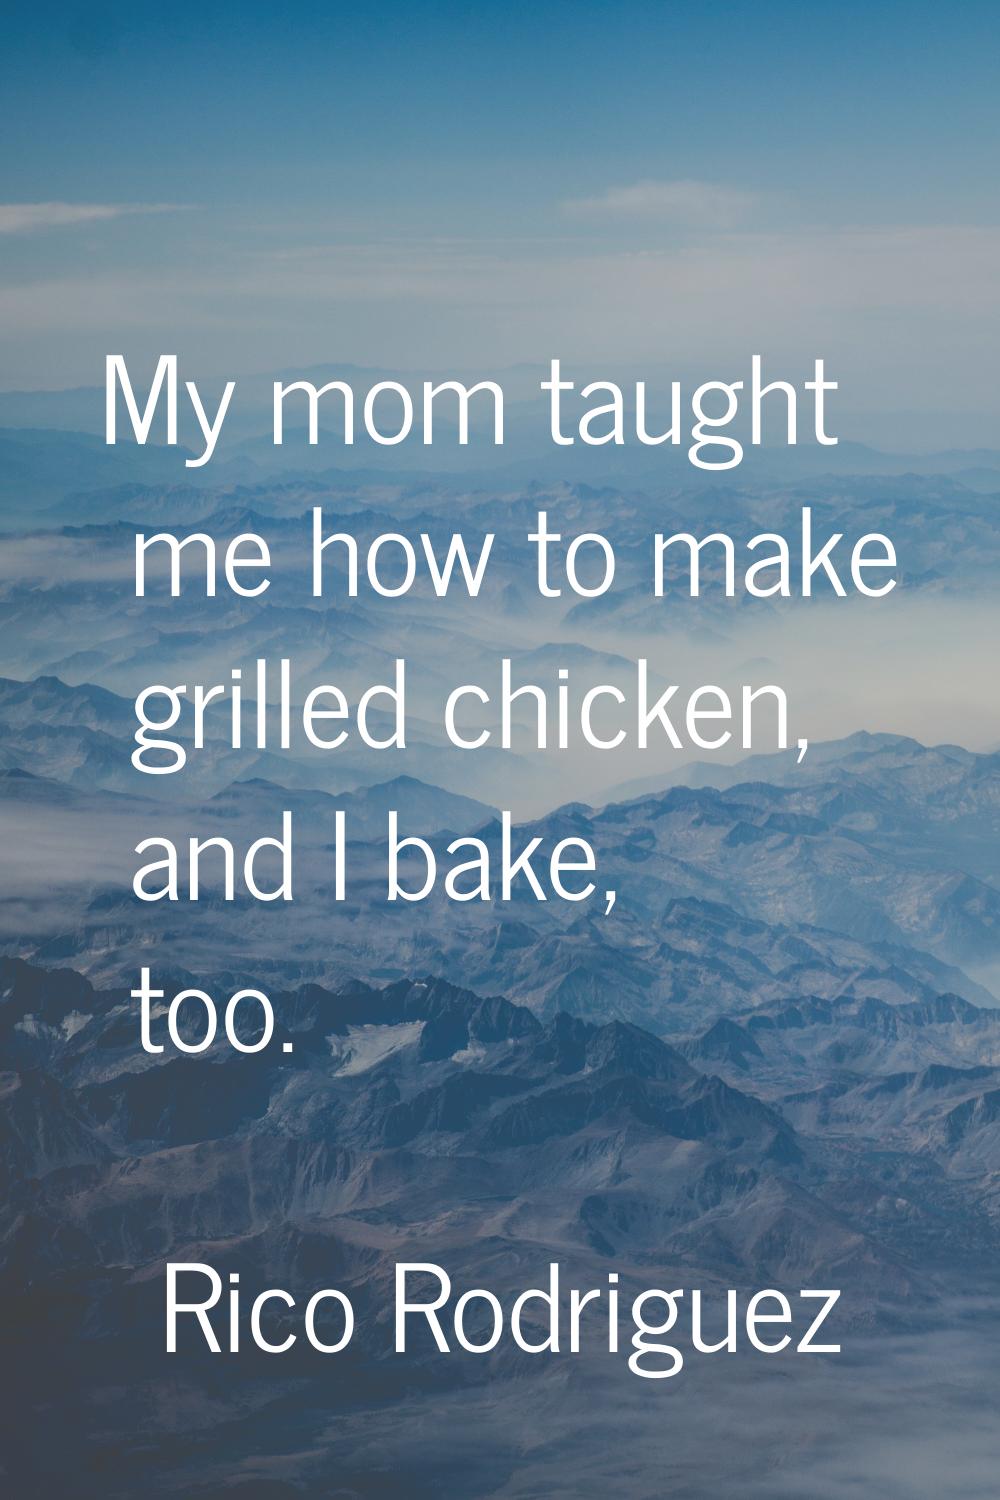 My mom taught me how to make grilled chicken, and I bake, too.